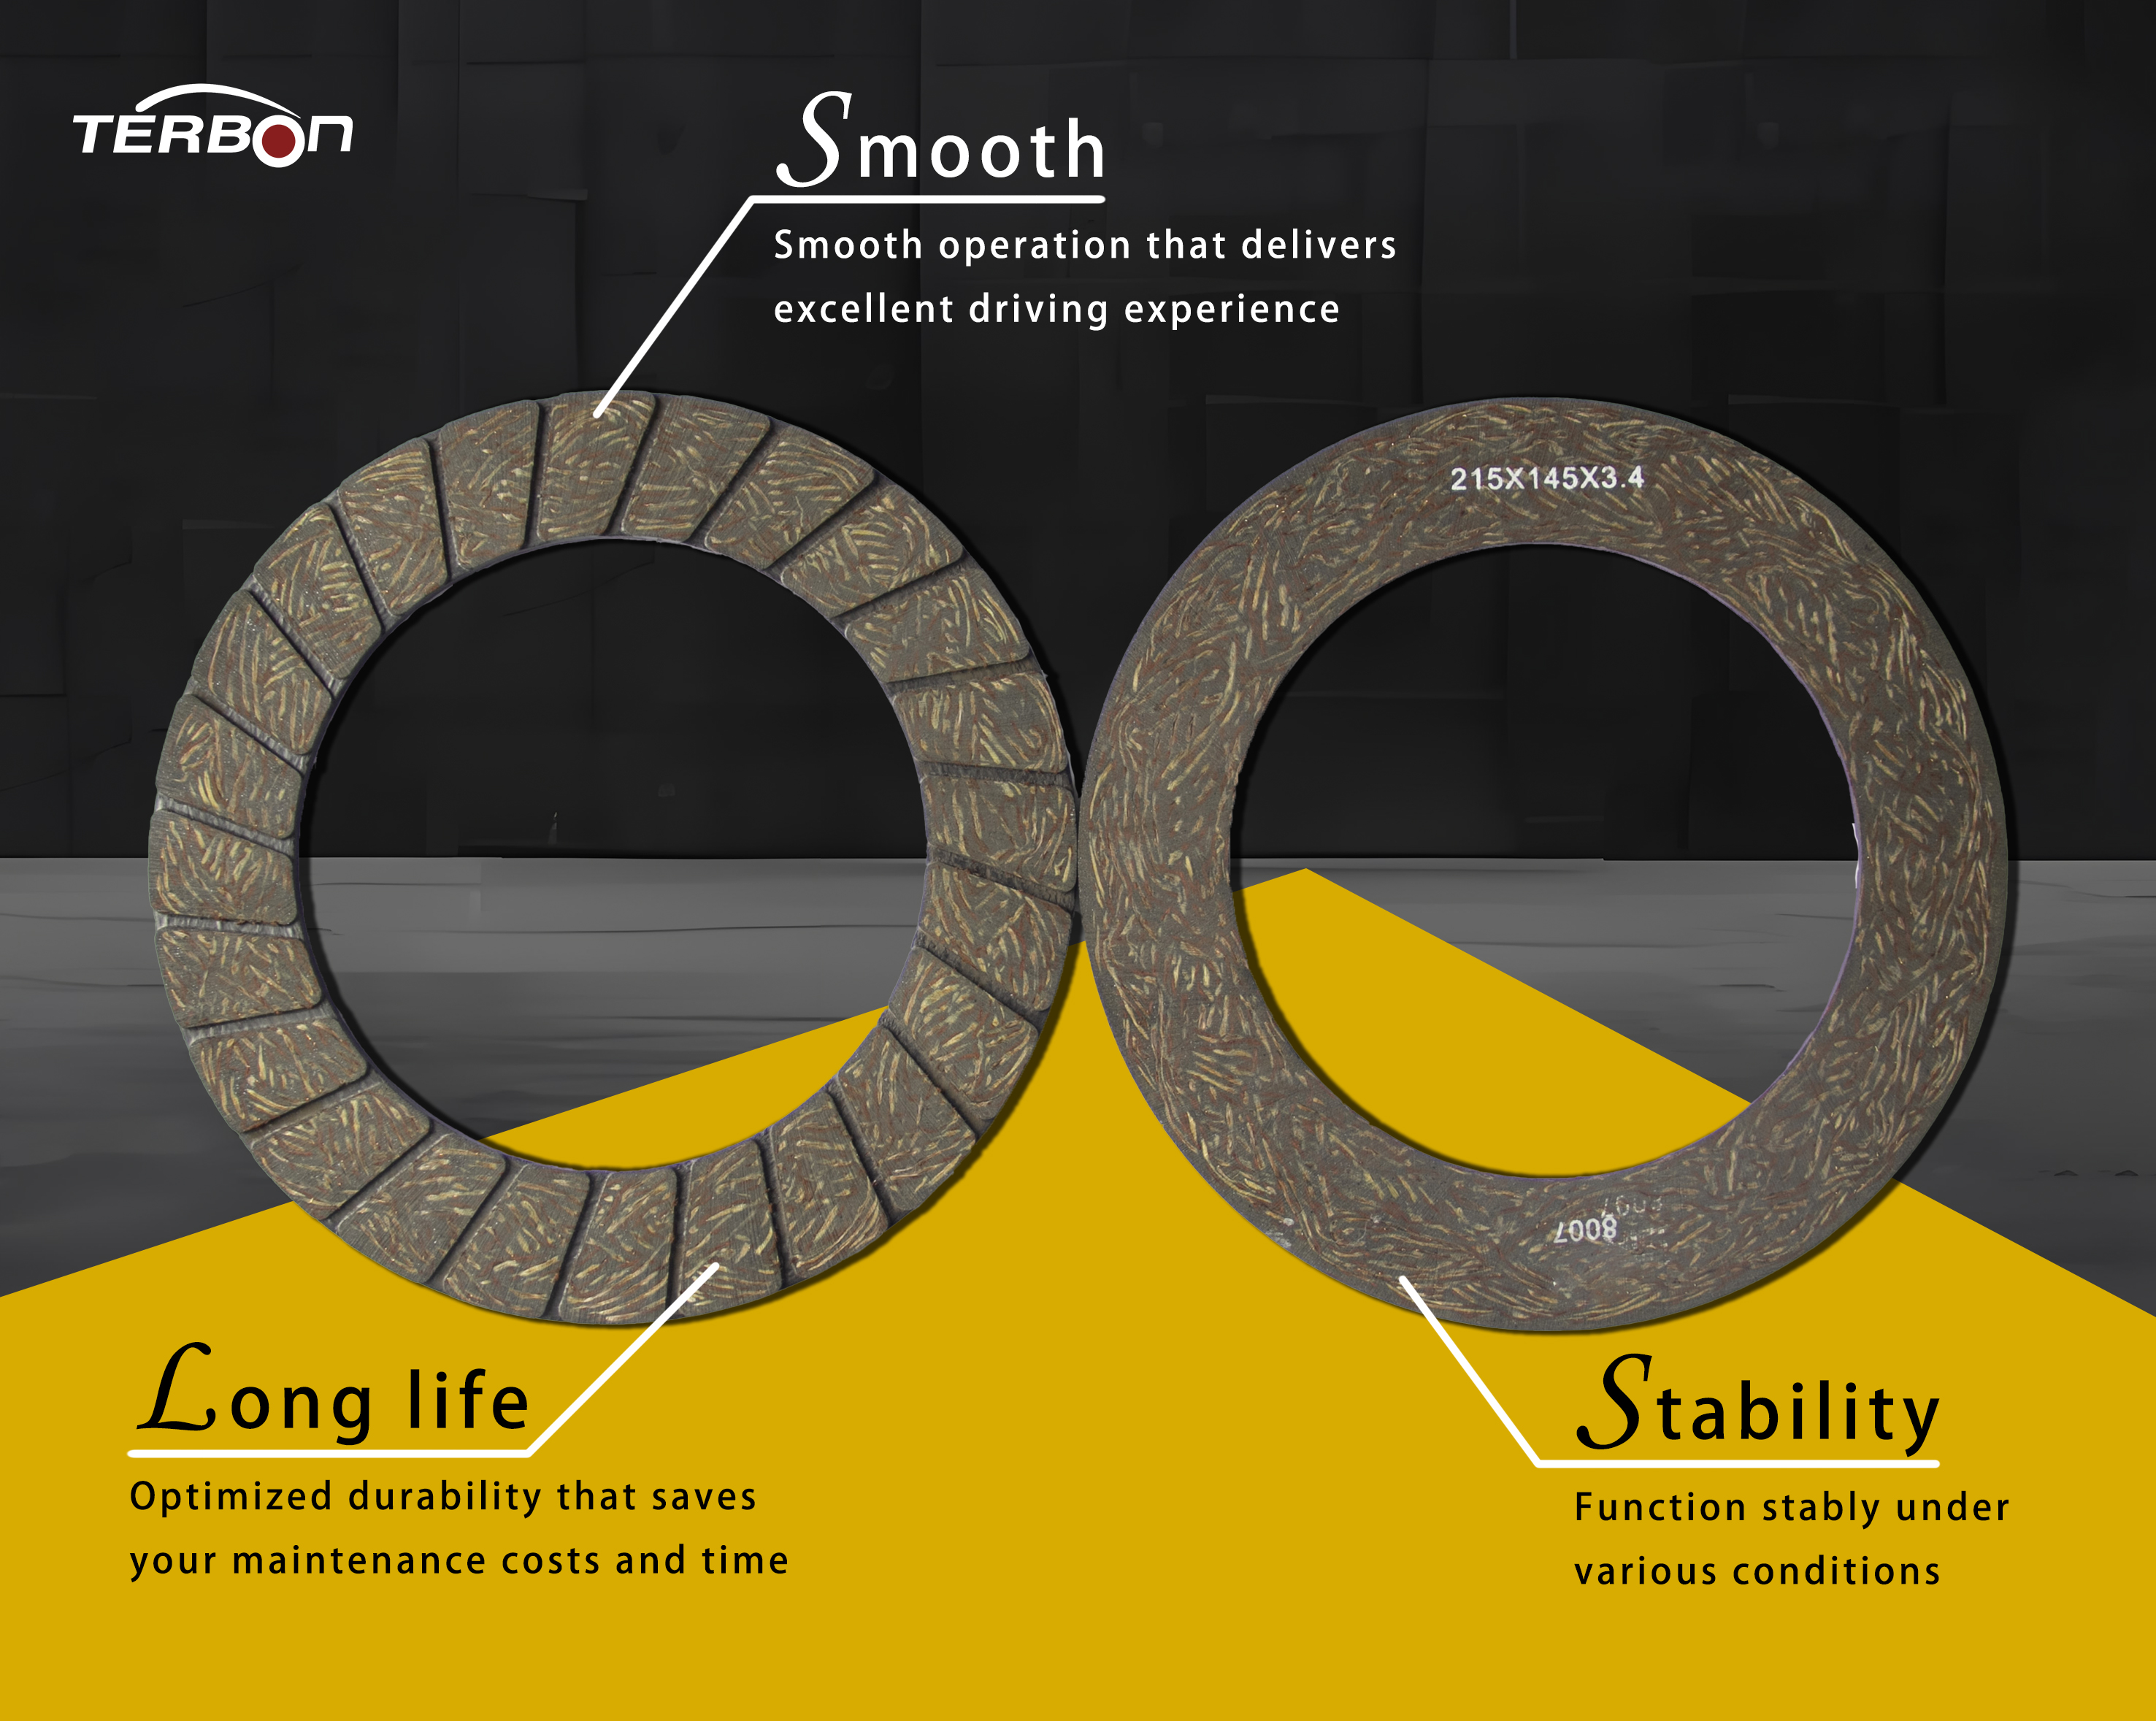 TERBON introduces new high-quality clutch friction discs: smooth, durable and stable.